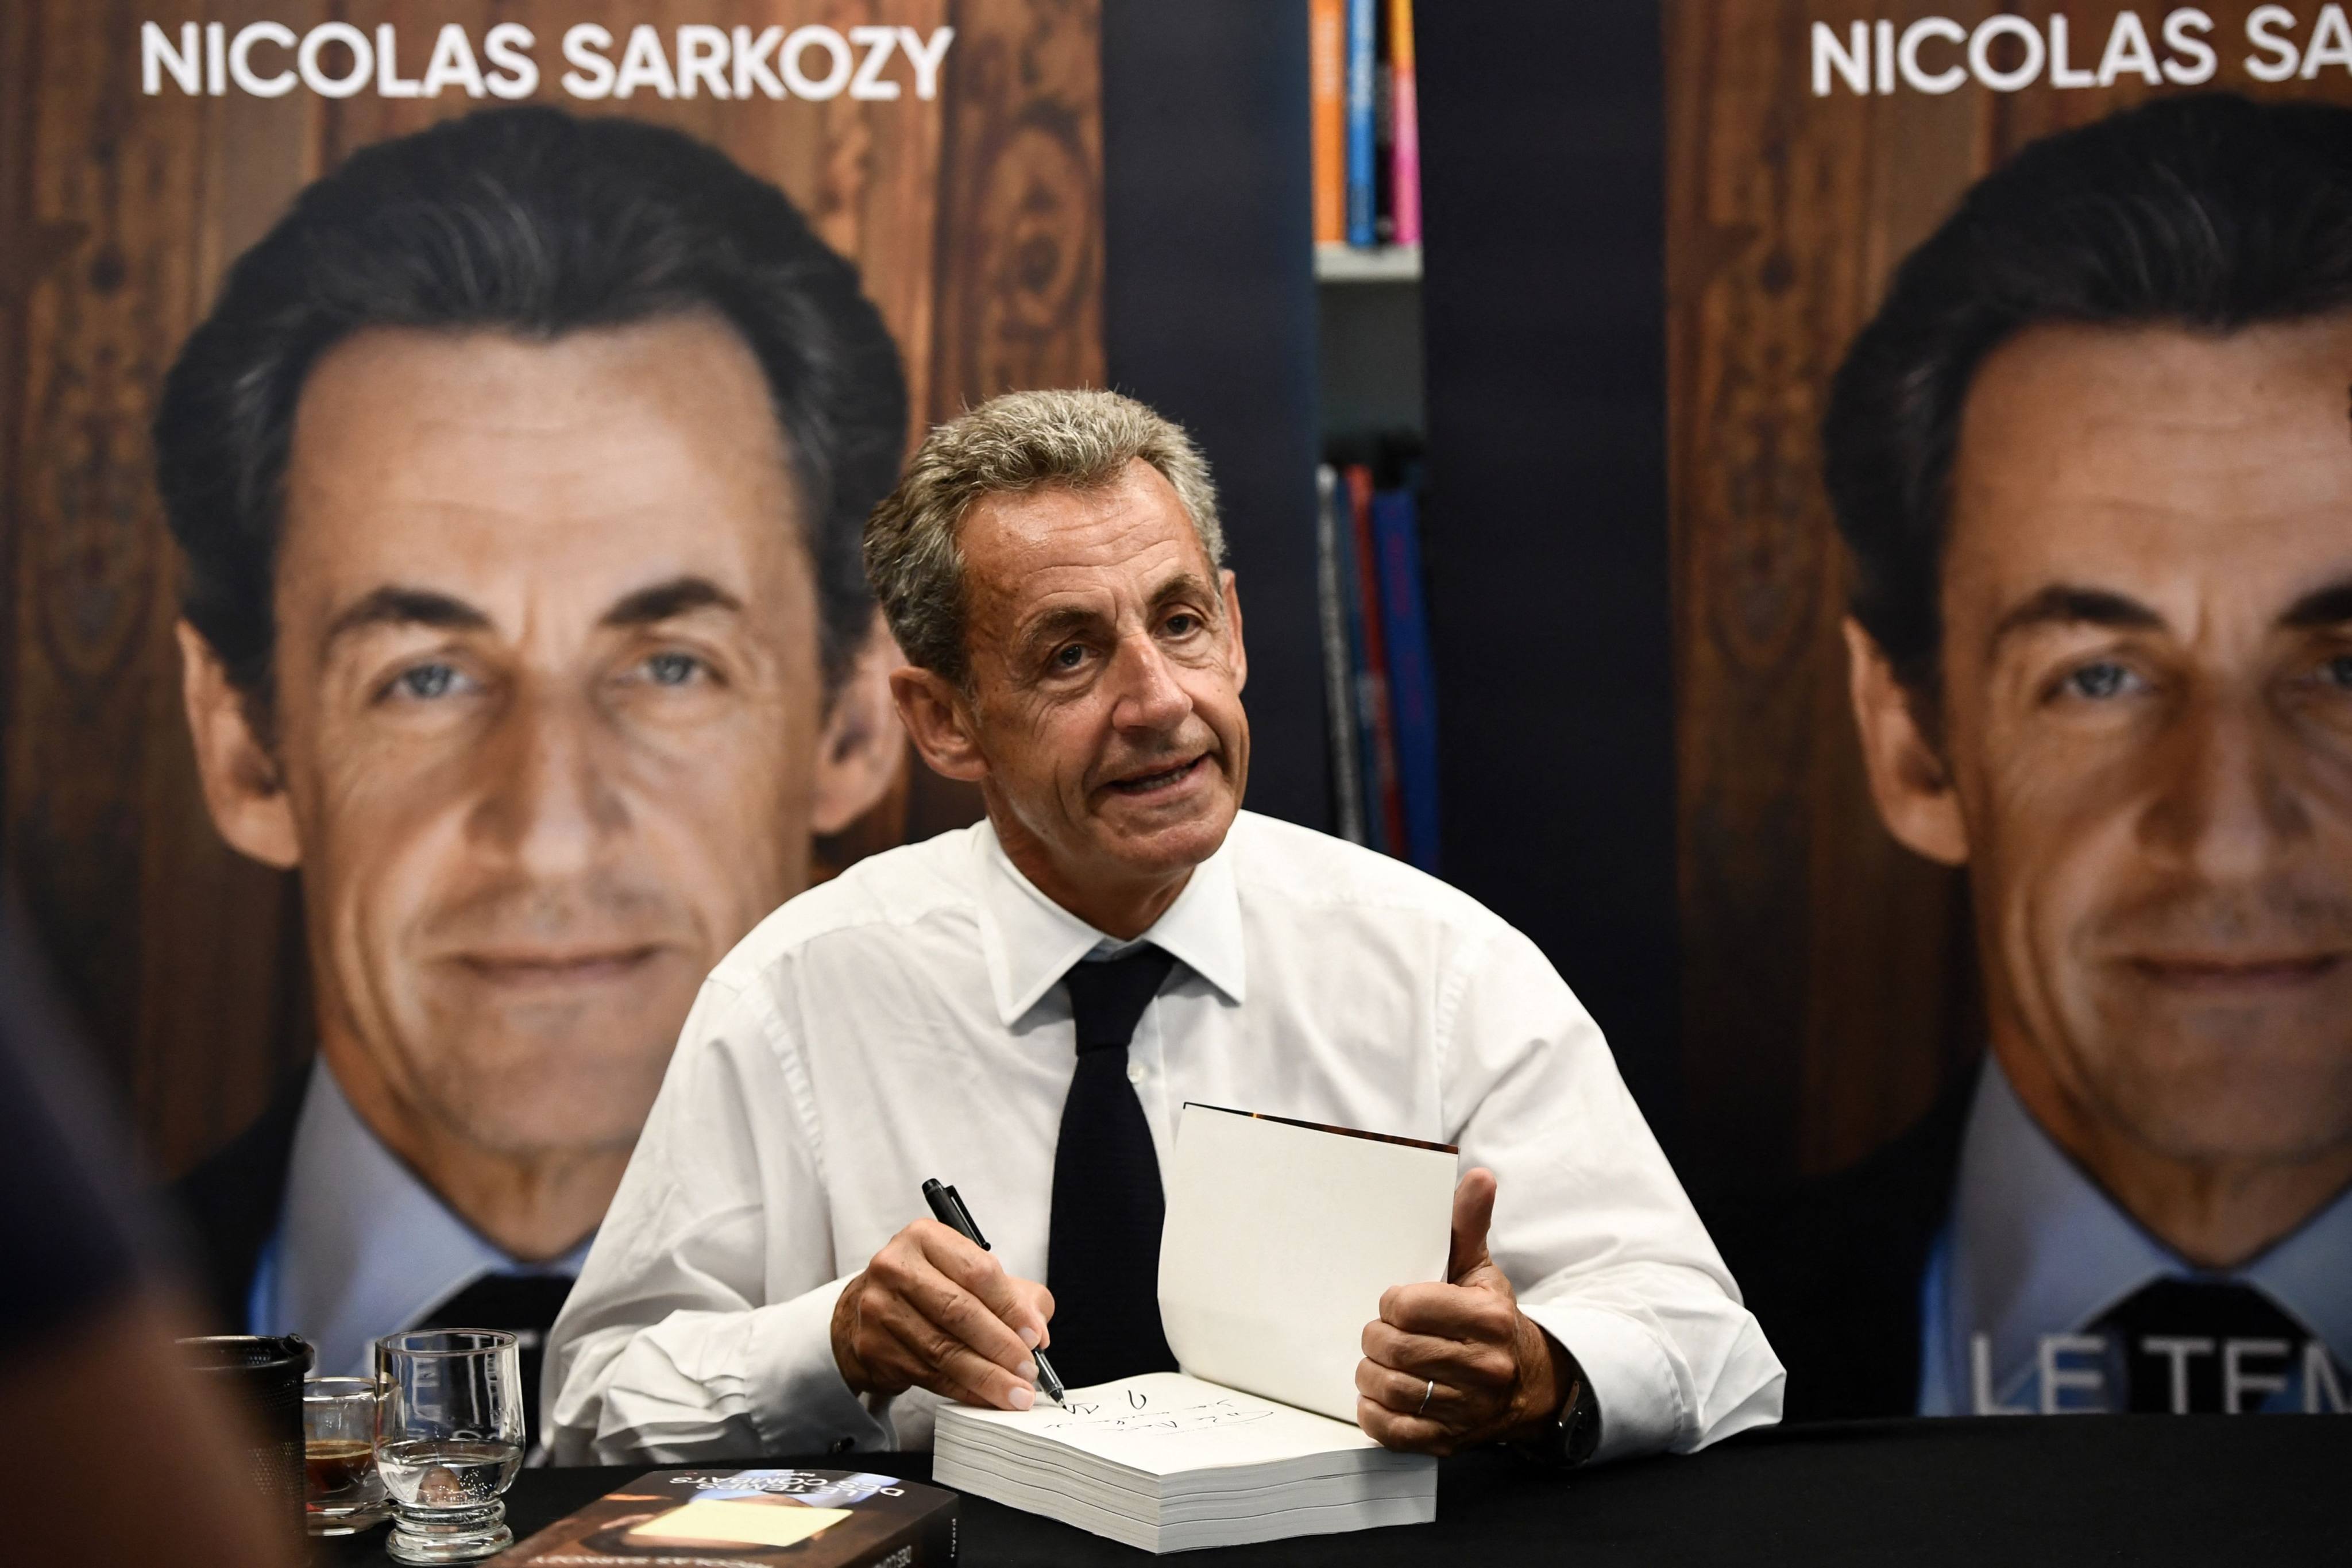 Former French president Nicolas Sarkozy signs copies of his book in Arcachon, France on Friday. Photo: AFP